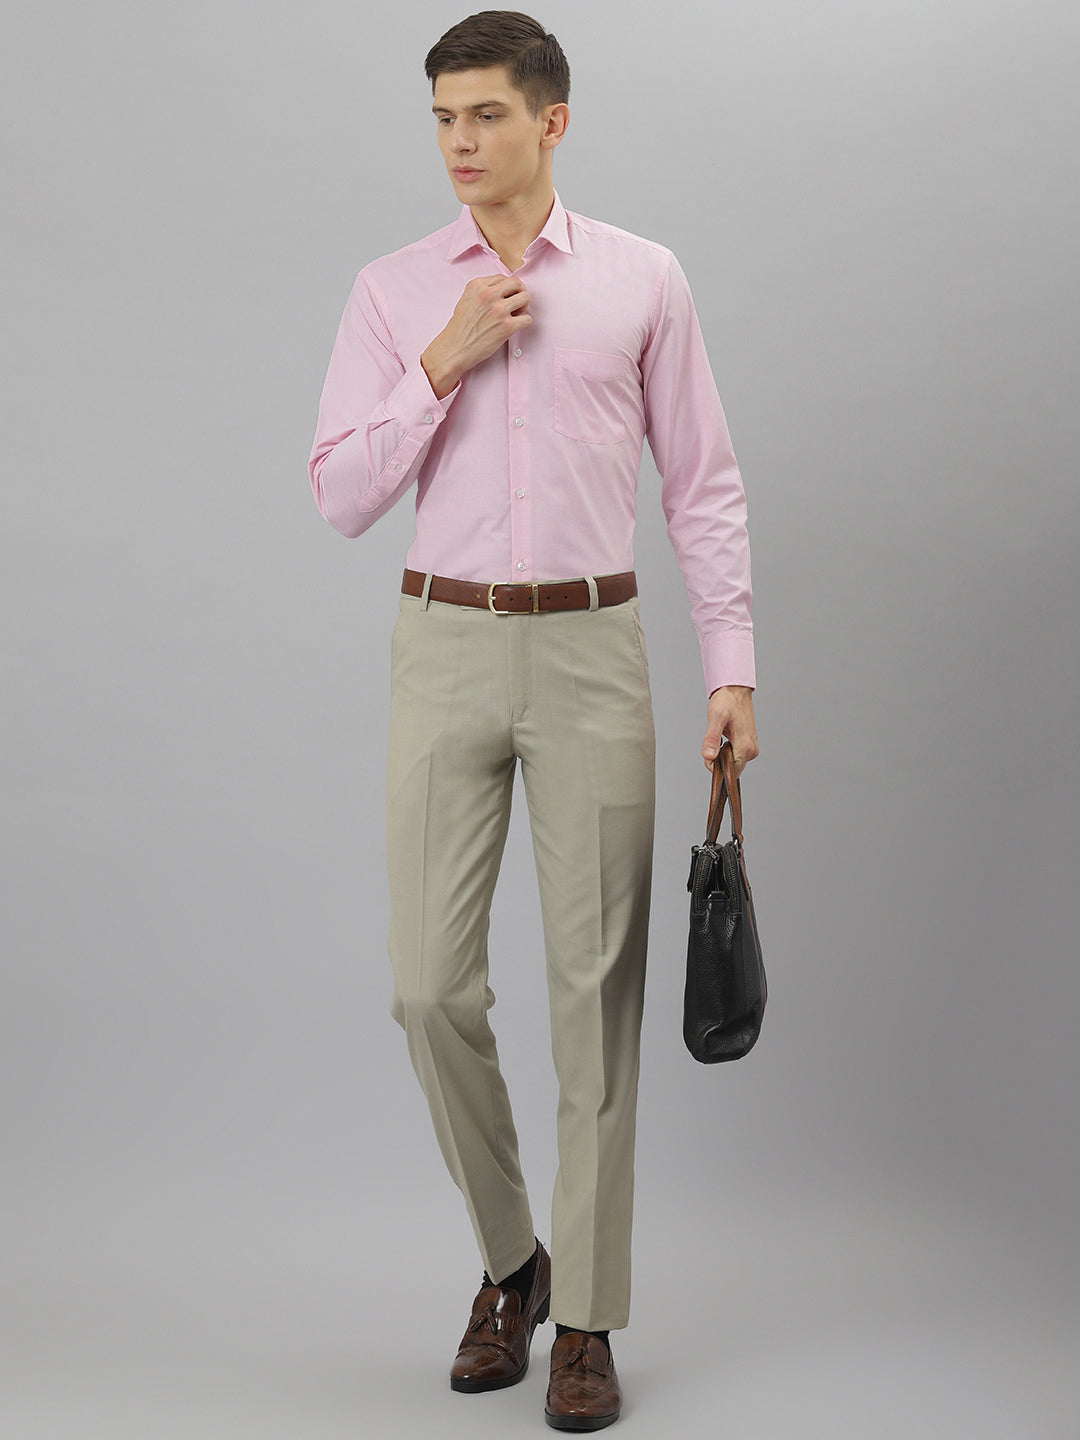 Mens Pink Oxford Shirt | Pink Shirt By Paul Brown | Wolf in Sheeps Clothing  By Paul Brown